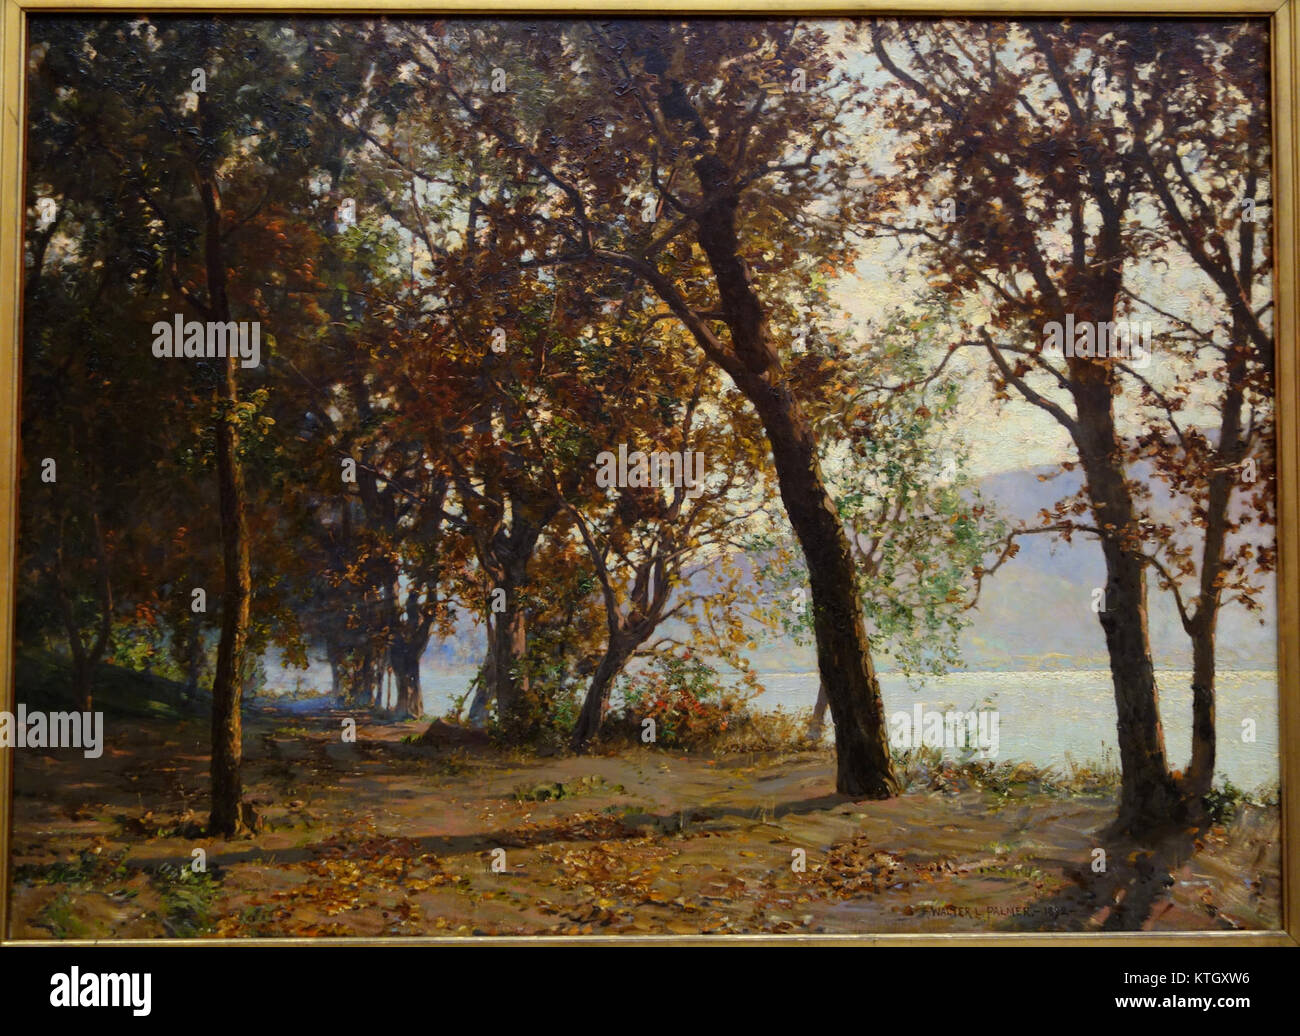 Autumn Morning   Mist Clearing Away, by Walter Launt Palmer, 1892, oil on canvas   Albany Institute of History and Art   DSC08089 Stock Photo